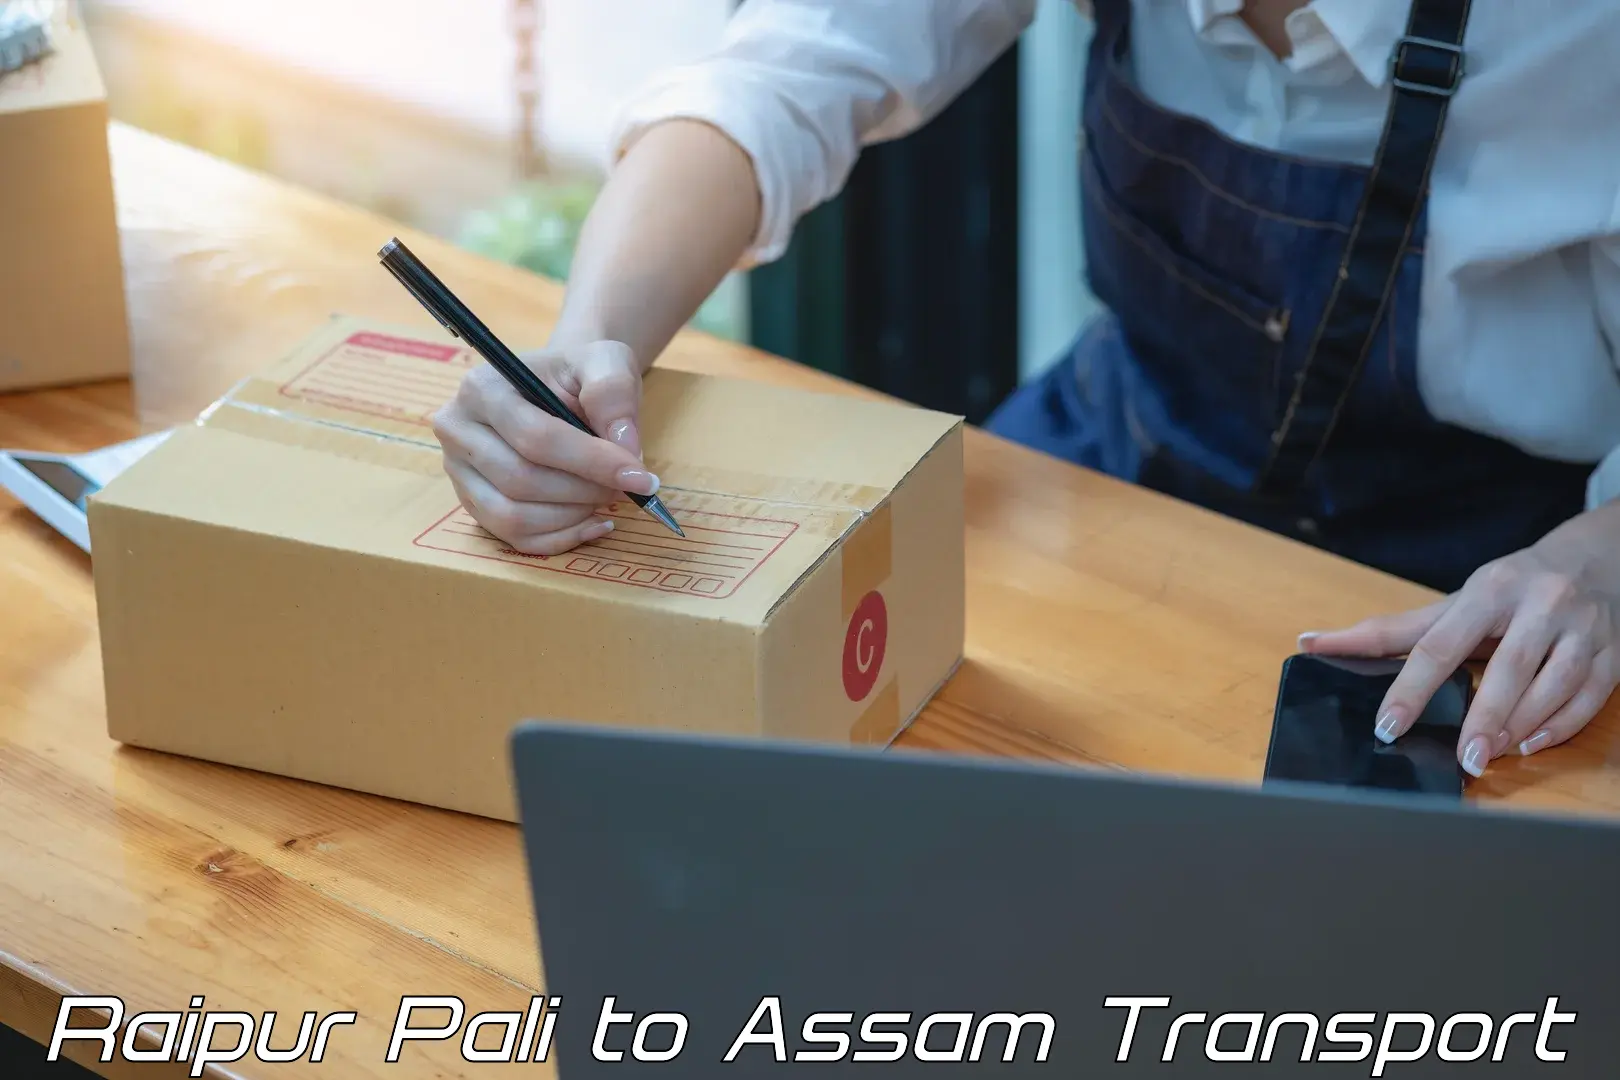 Domestic goods transportation services in Raipur Pali to Assam